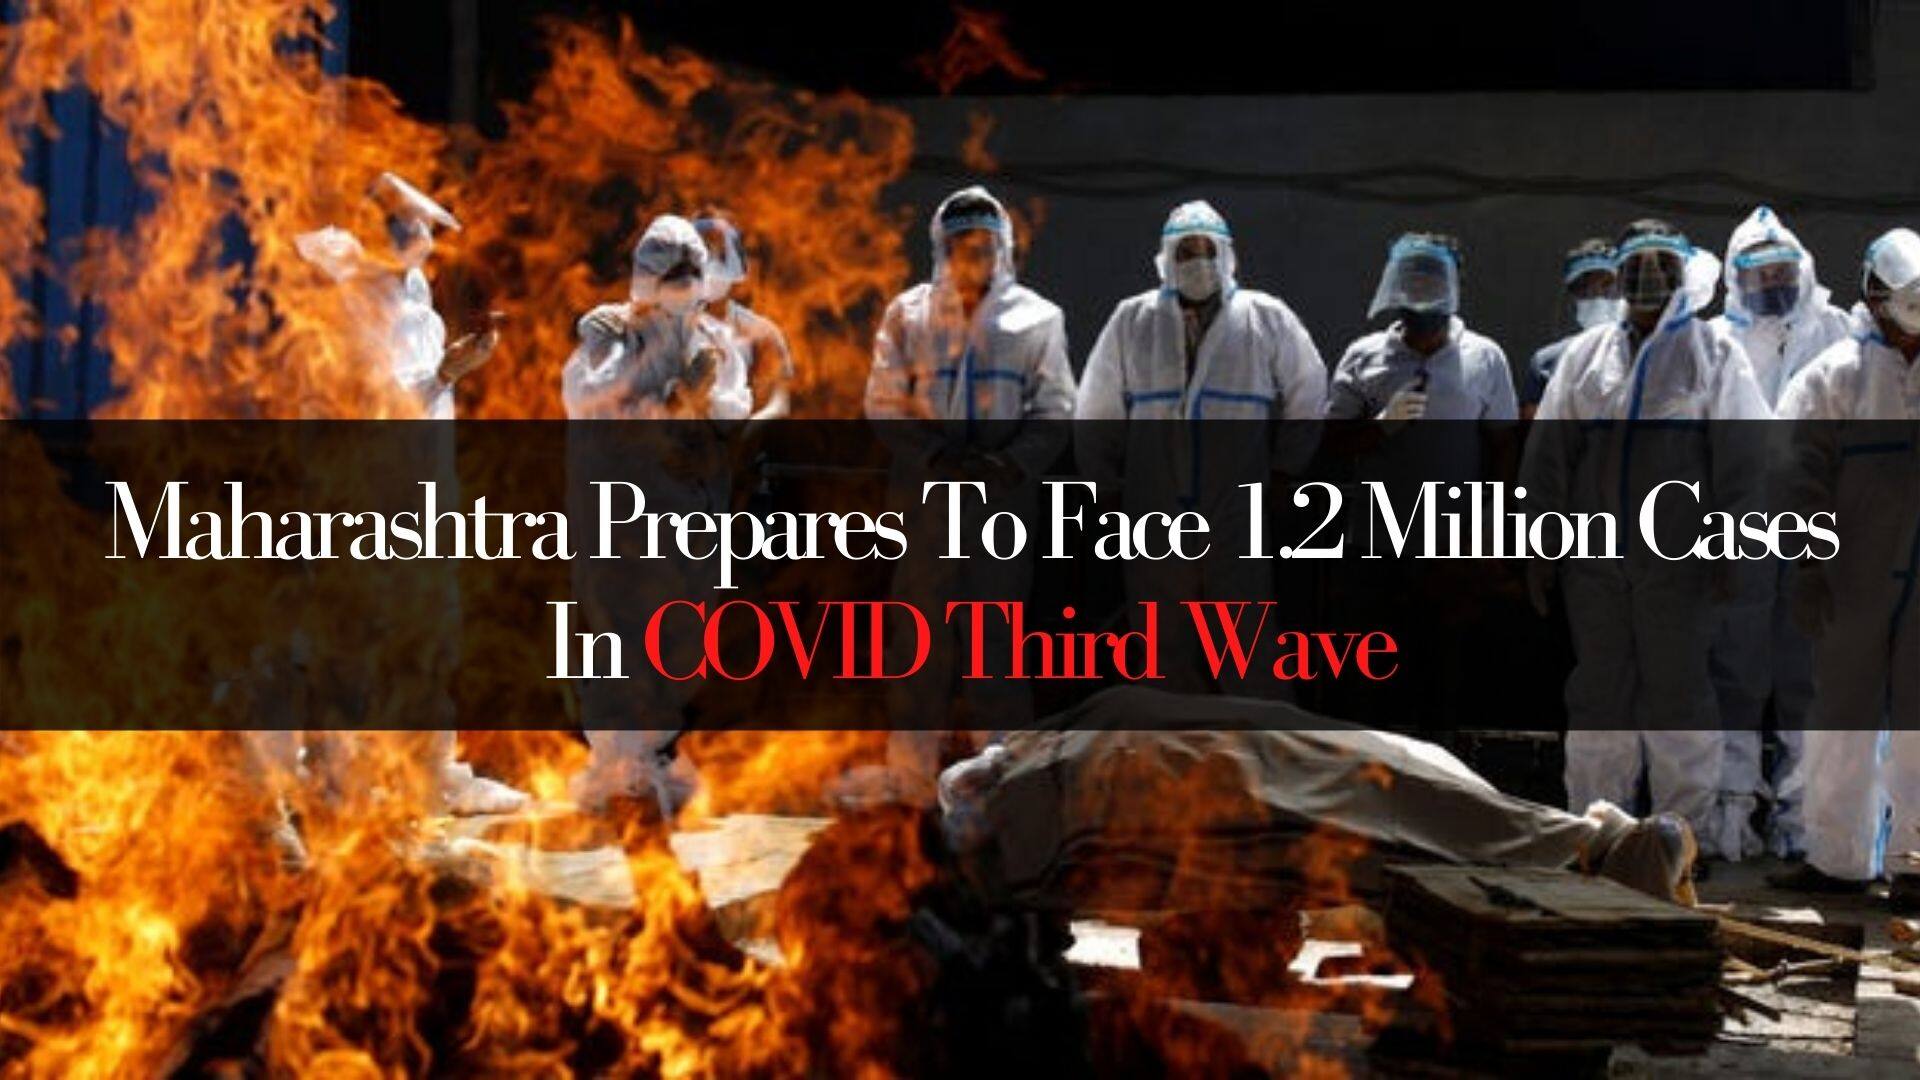 COVID-19 Live Updates: Maharashtra Prepares To Face 1.2 Million Cases In COVID-19 Third Wave